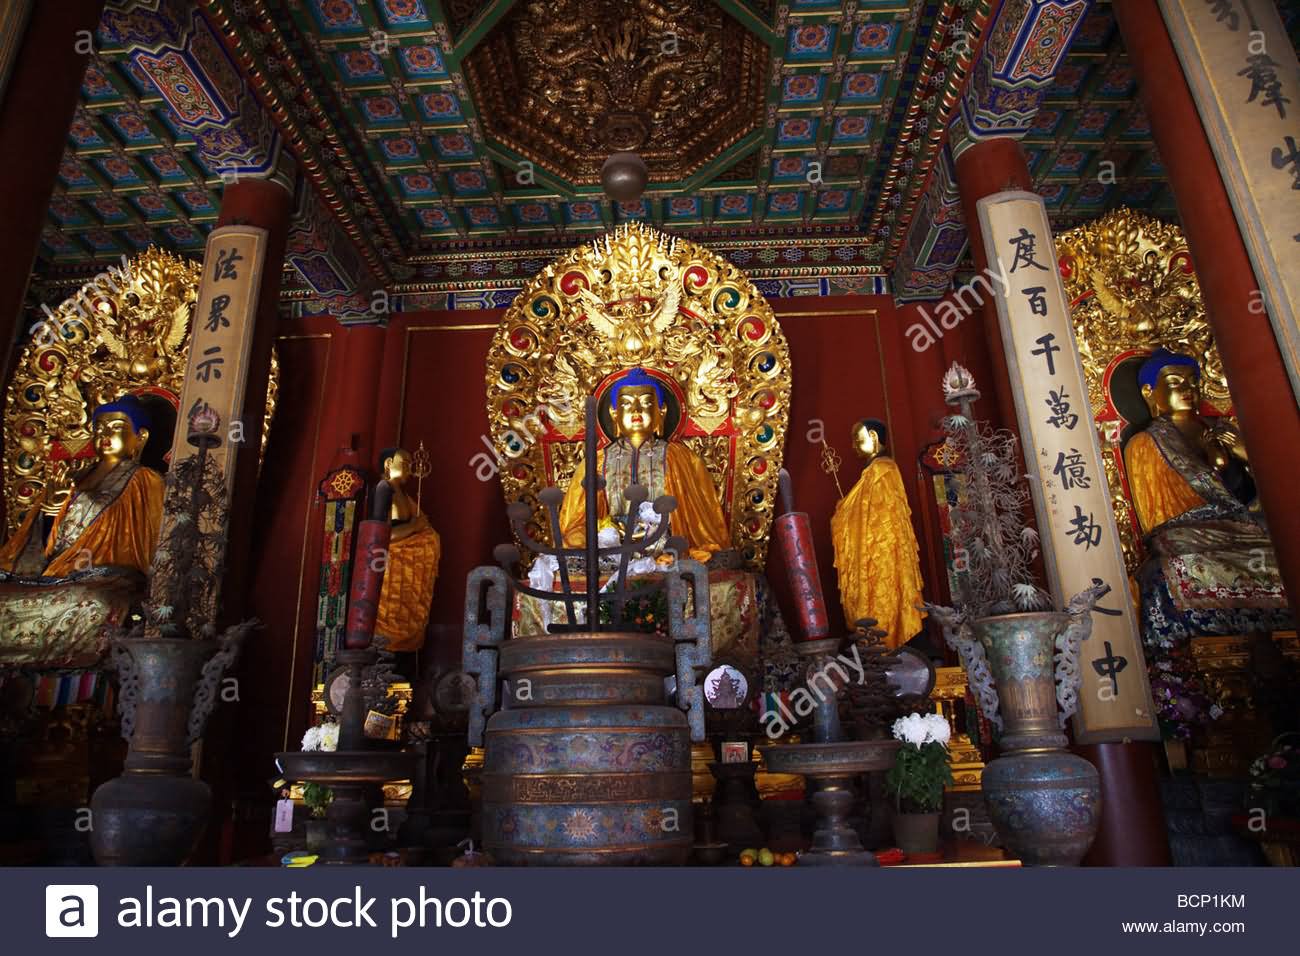 Interior Of The Hall Of Yonghe Temple In Beijing, China